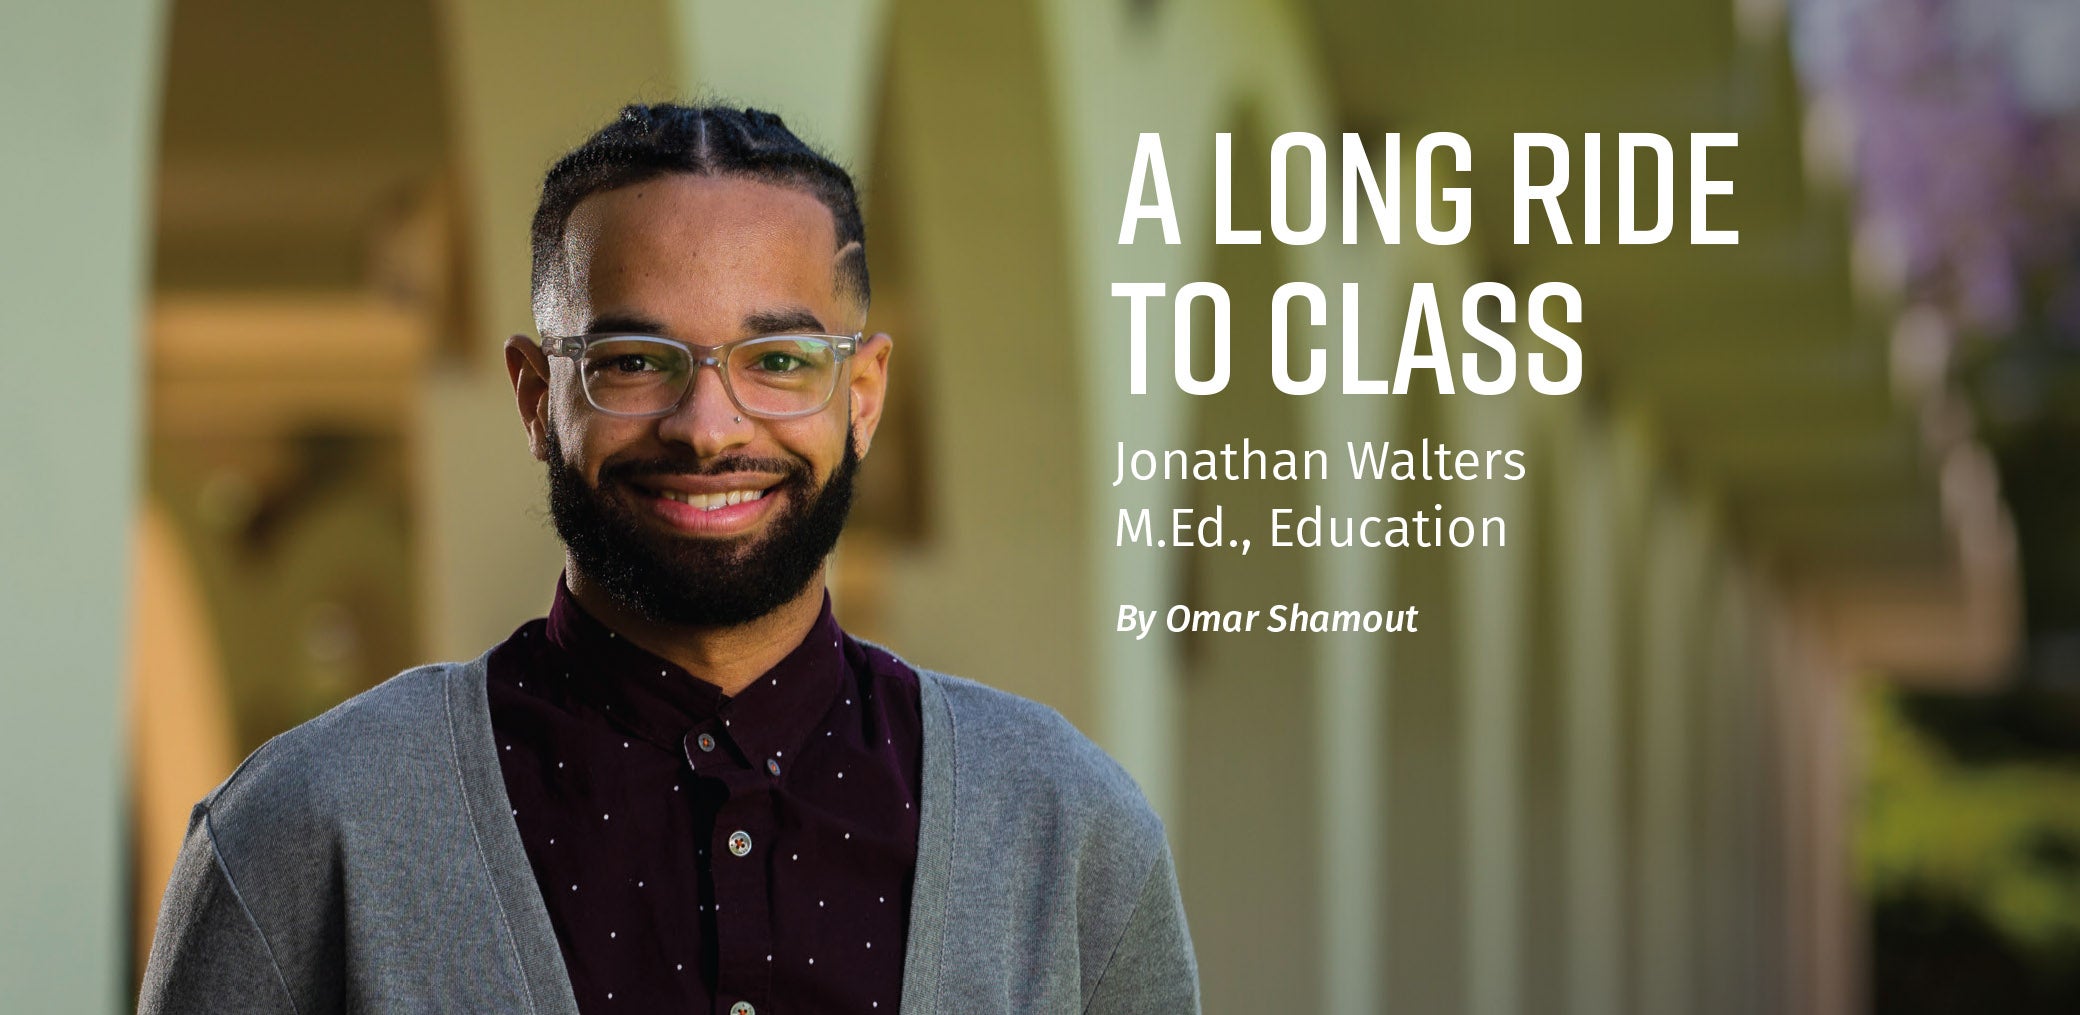 A Long Ride to Class, Jonathan Walters